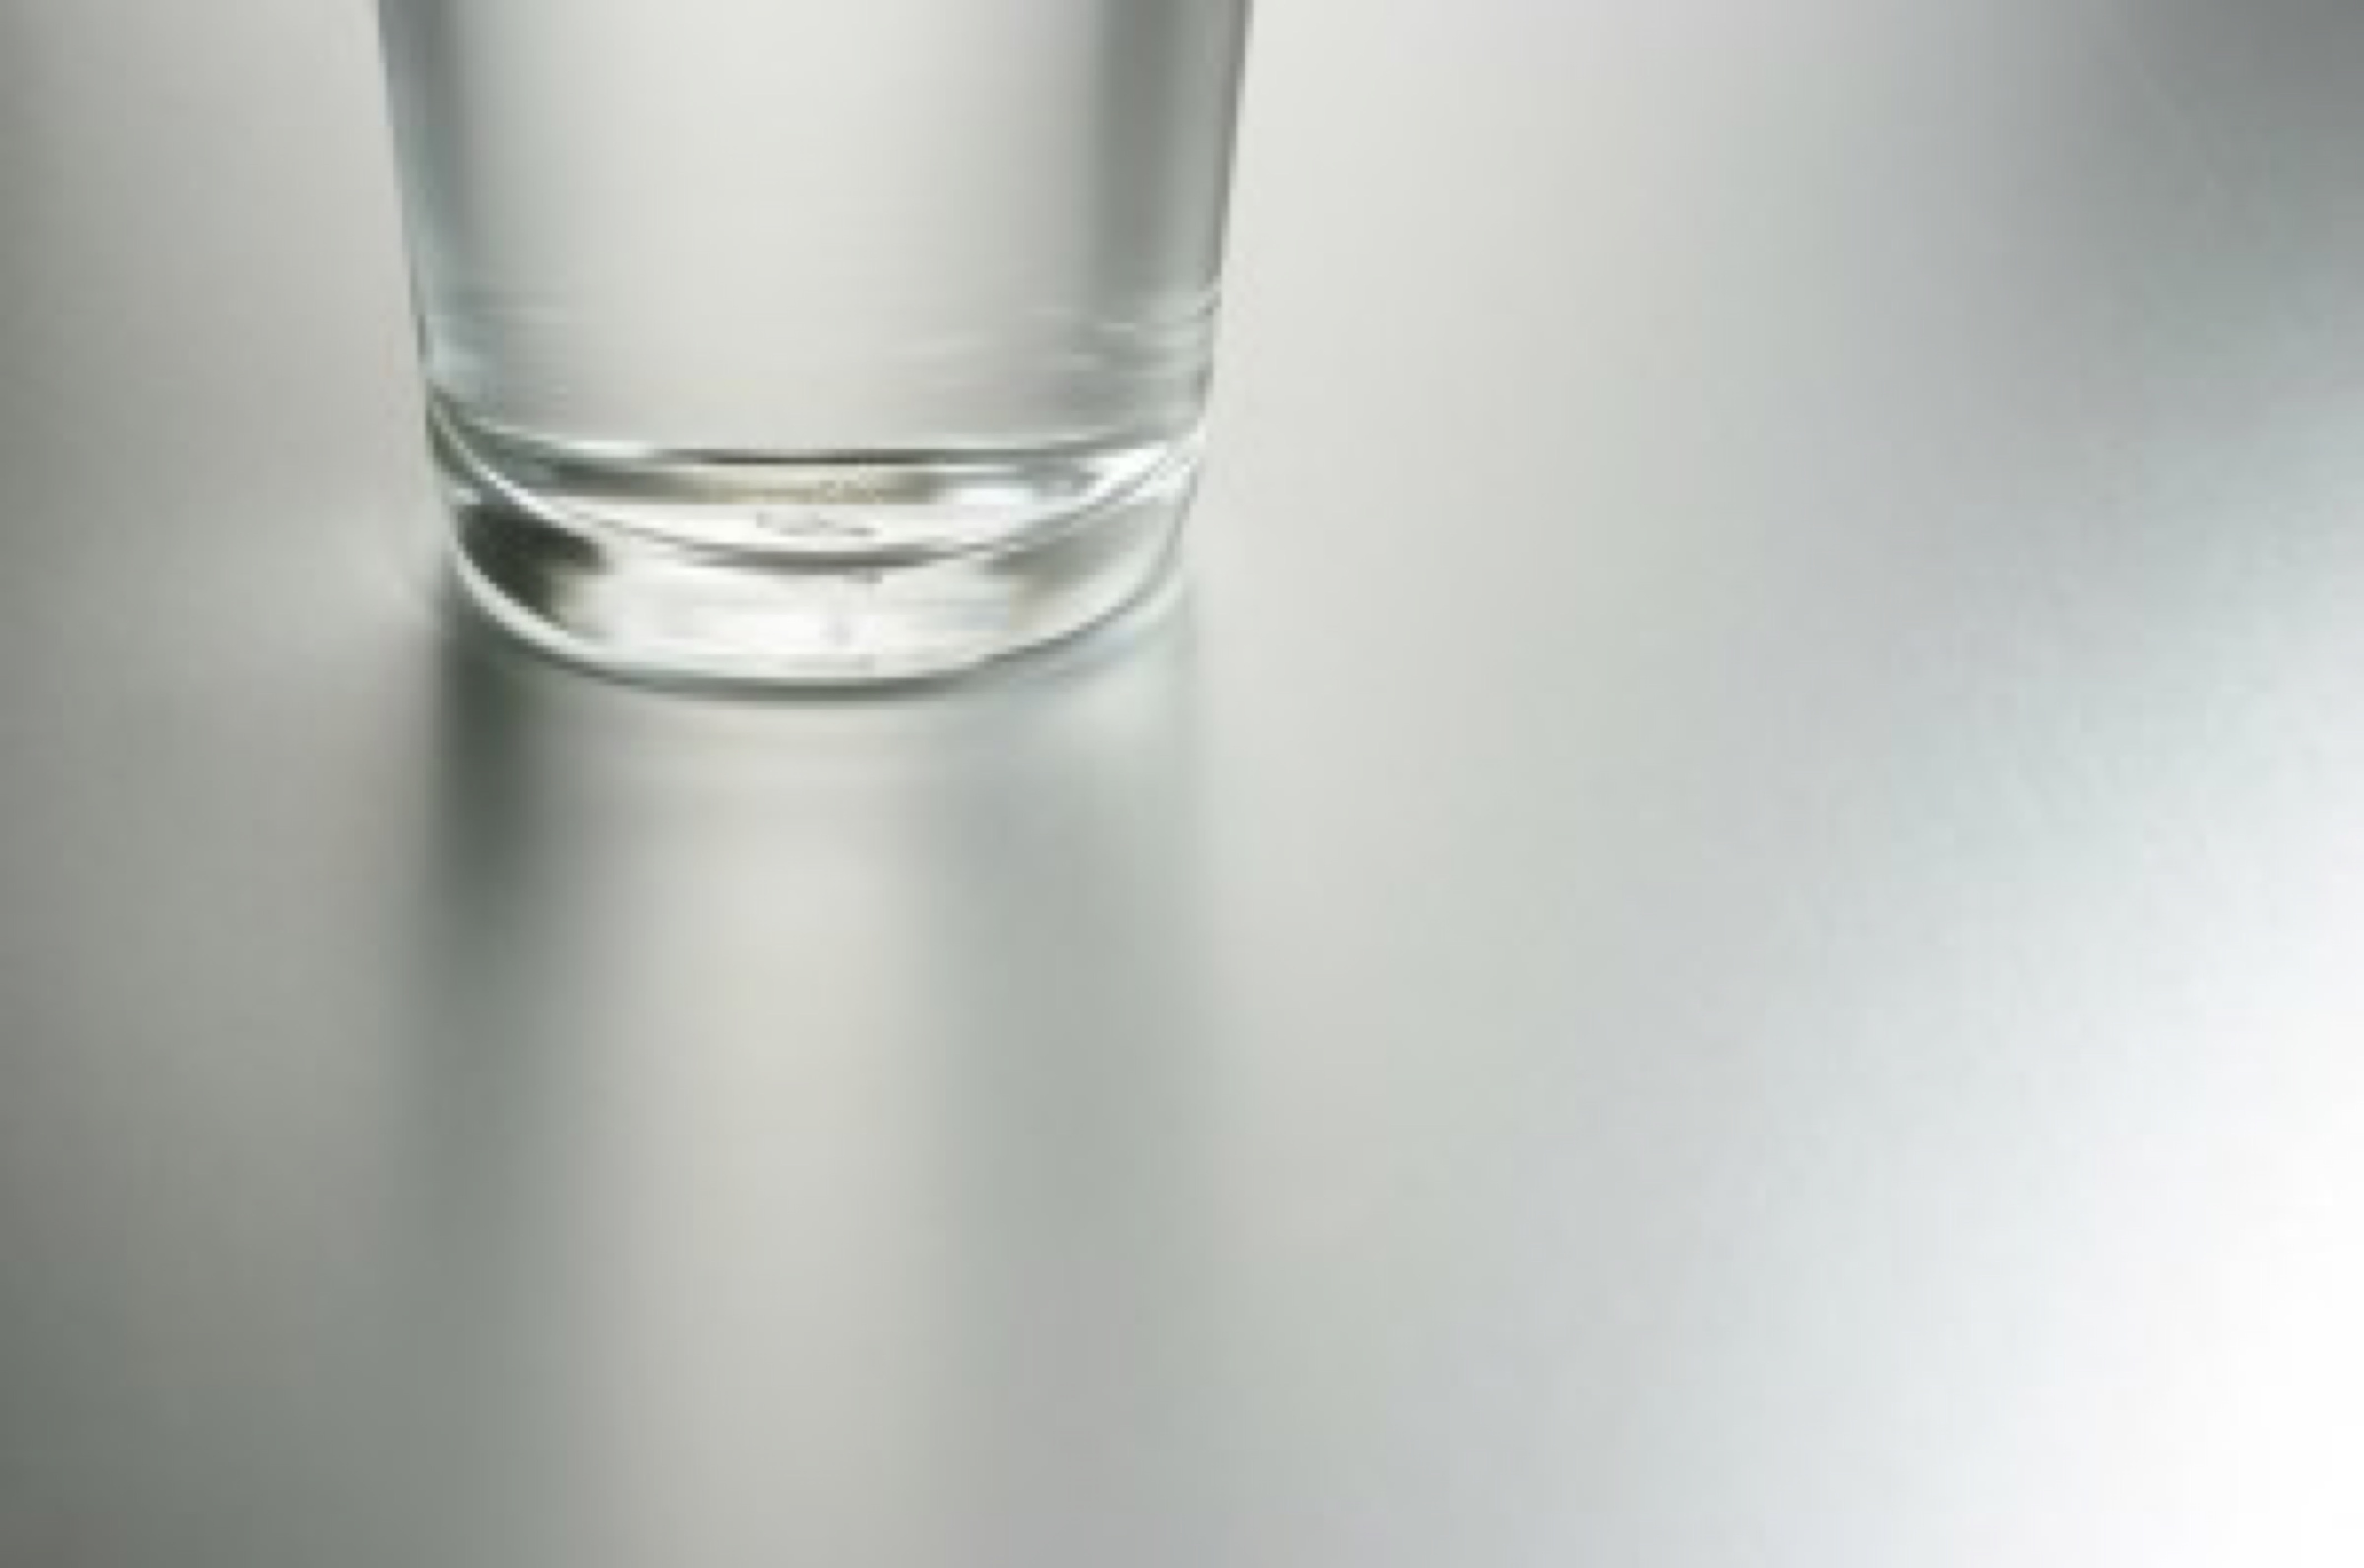 GLASS OF WATER